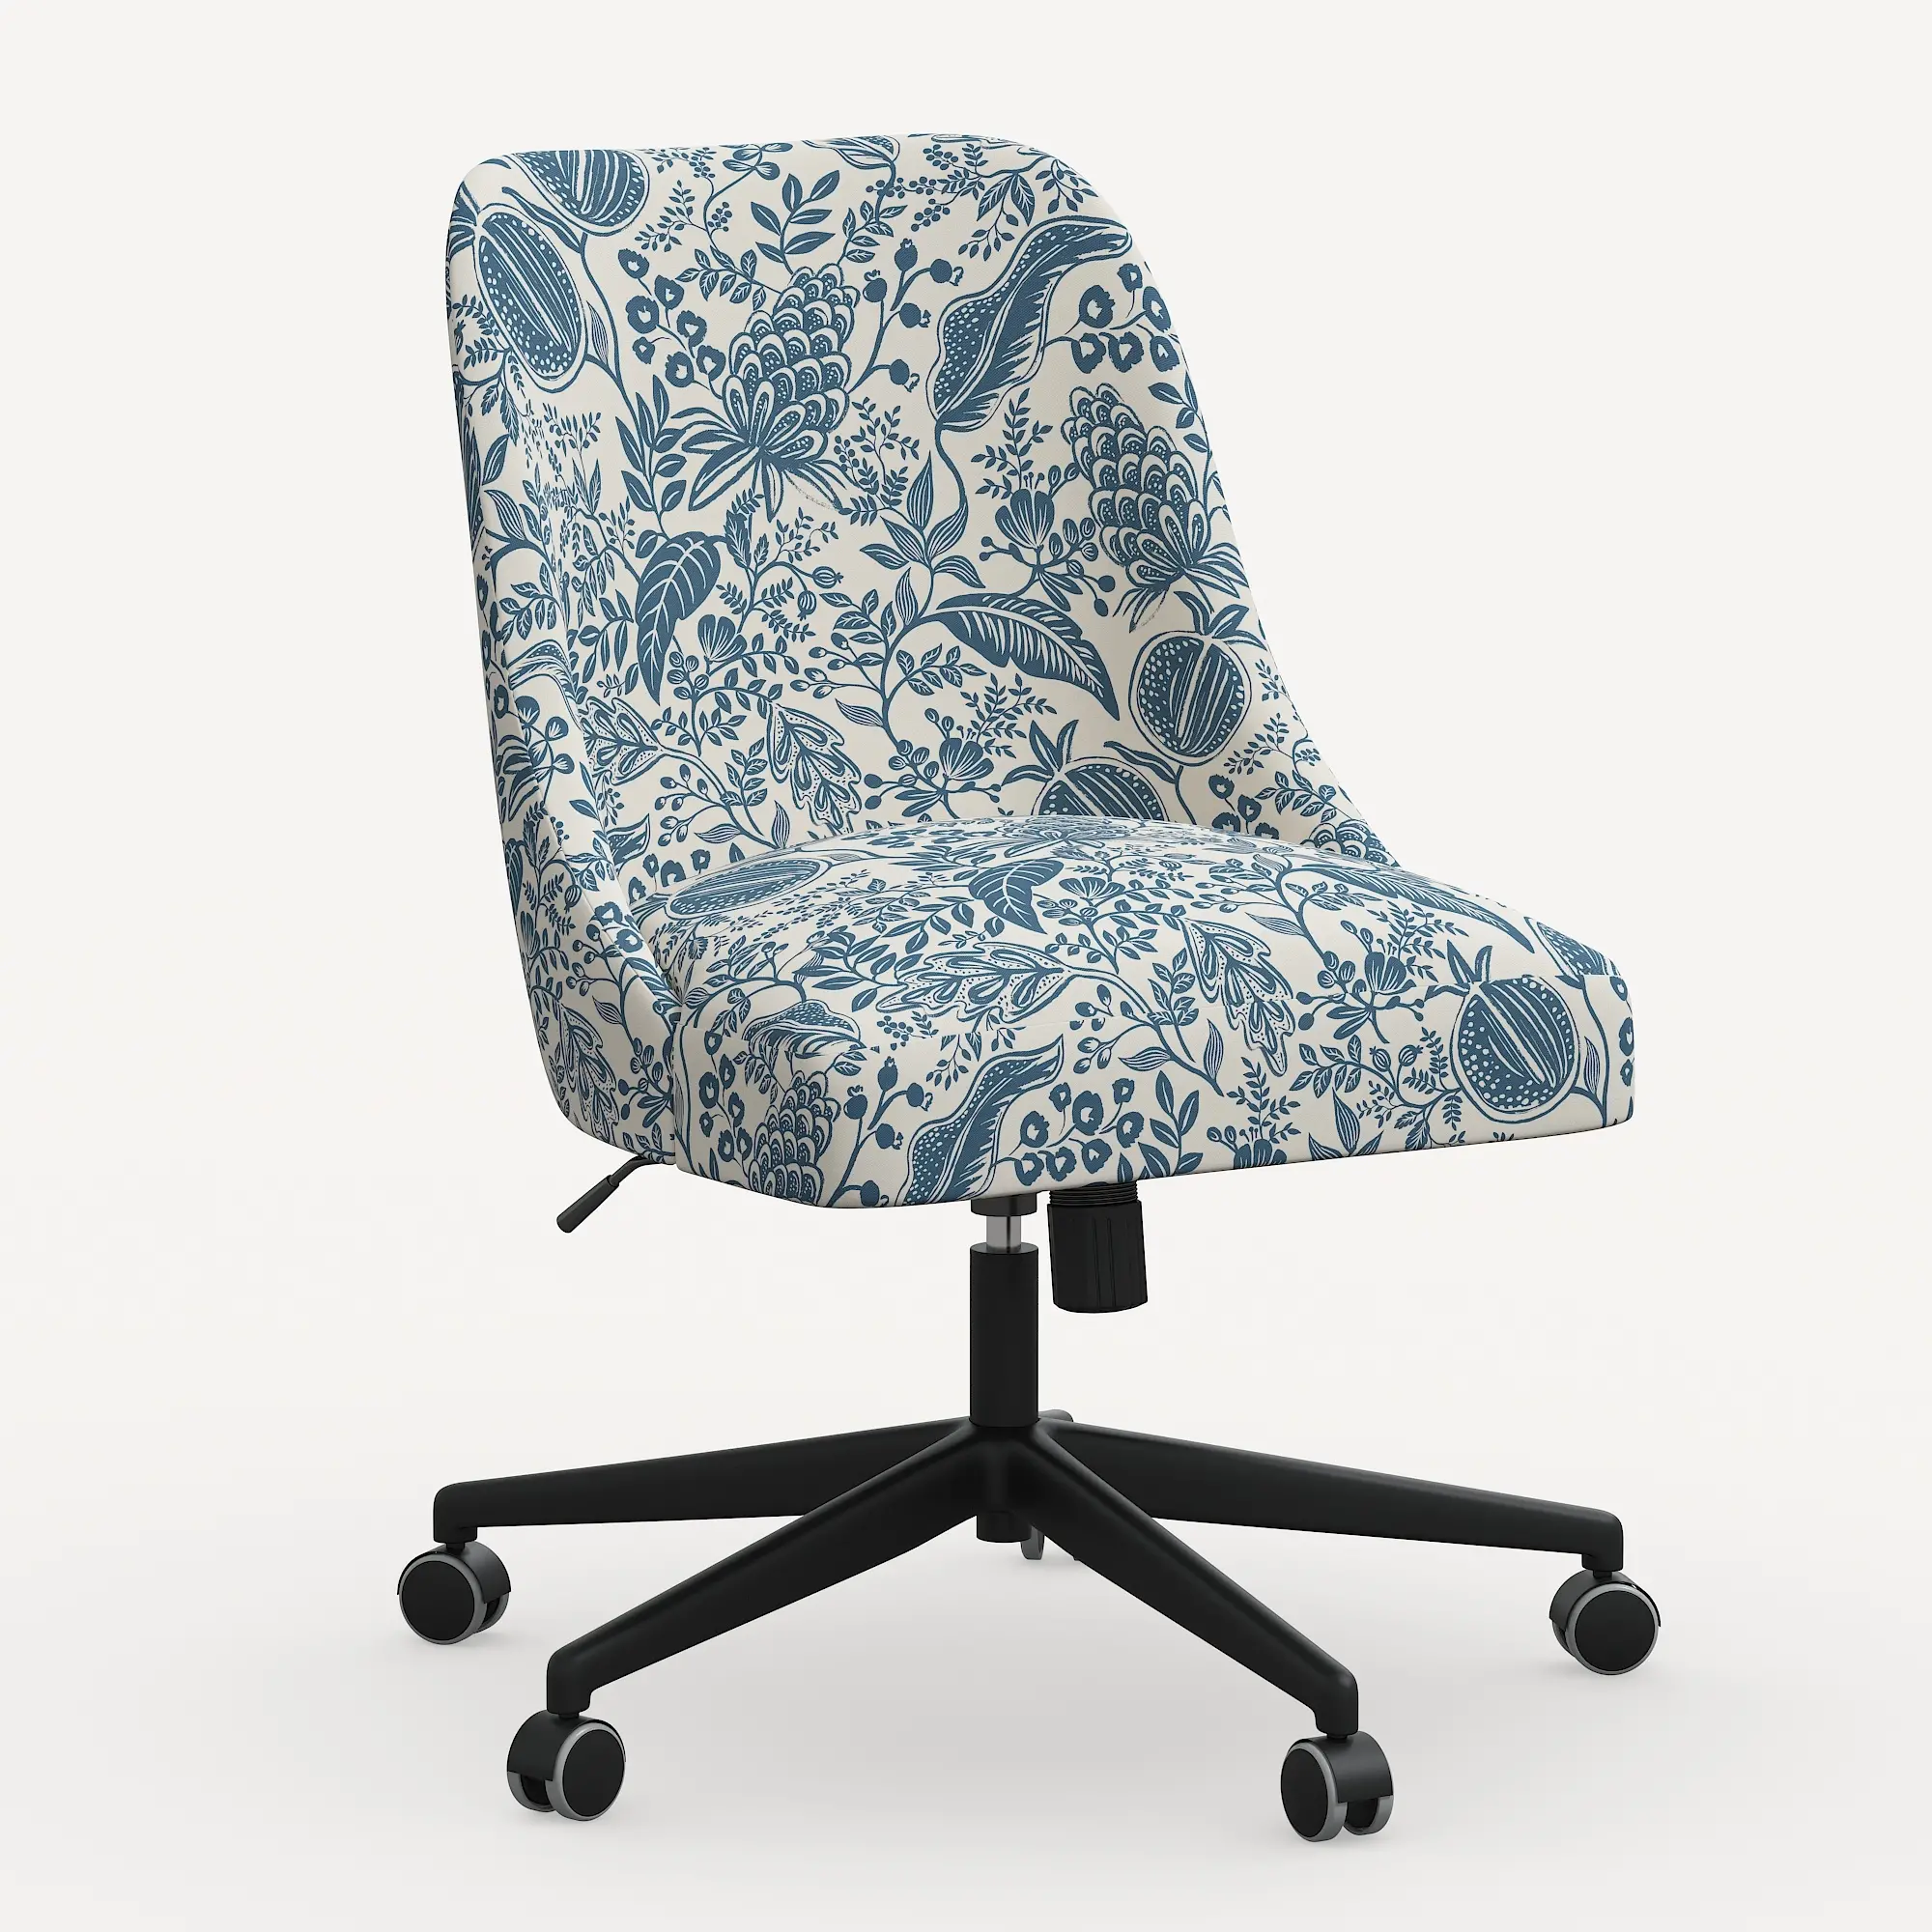 Rifle Paper Co. Oxford Blue Pomegranate Office Chair